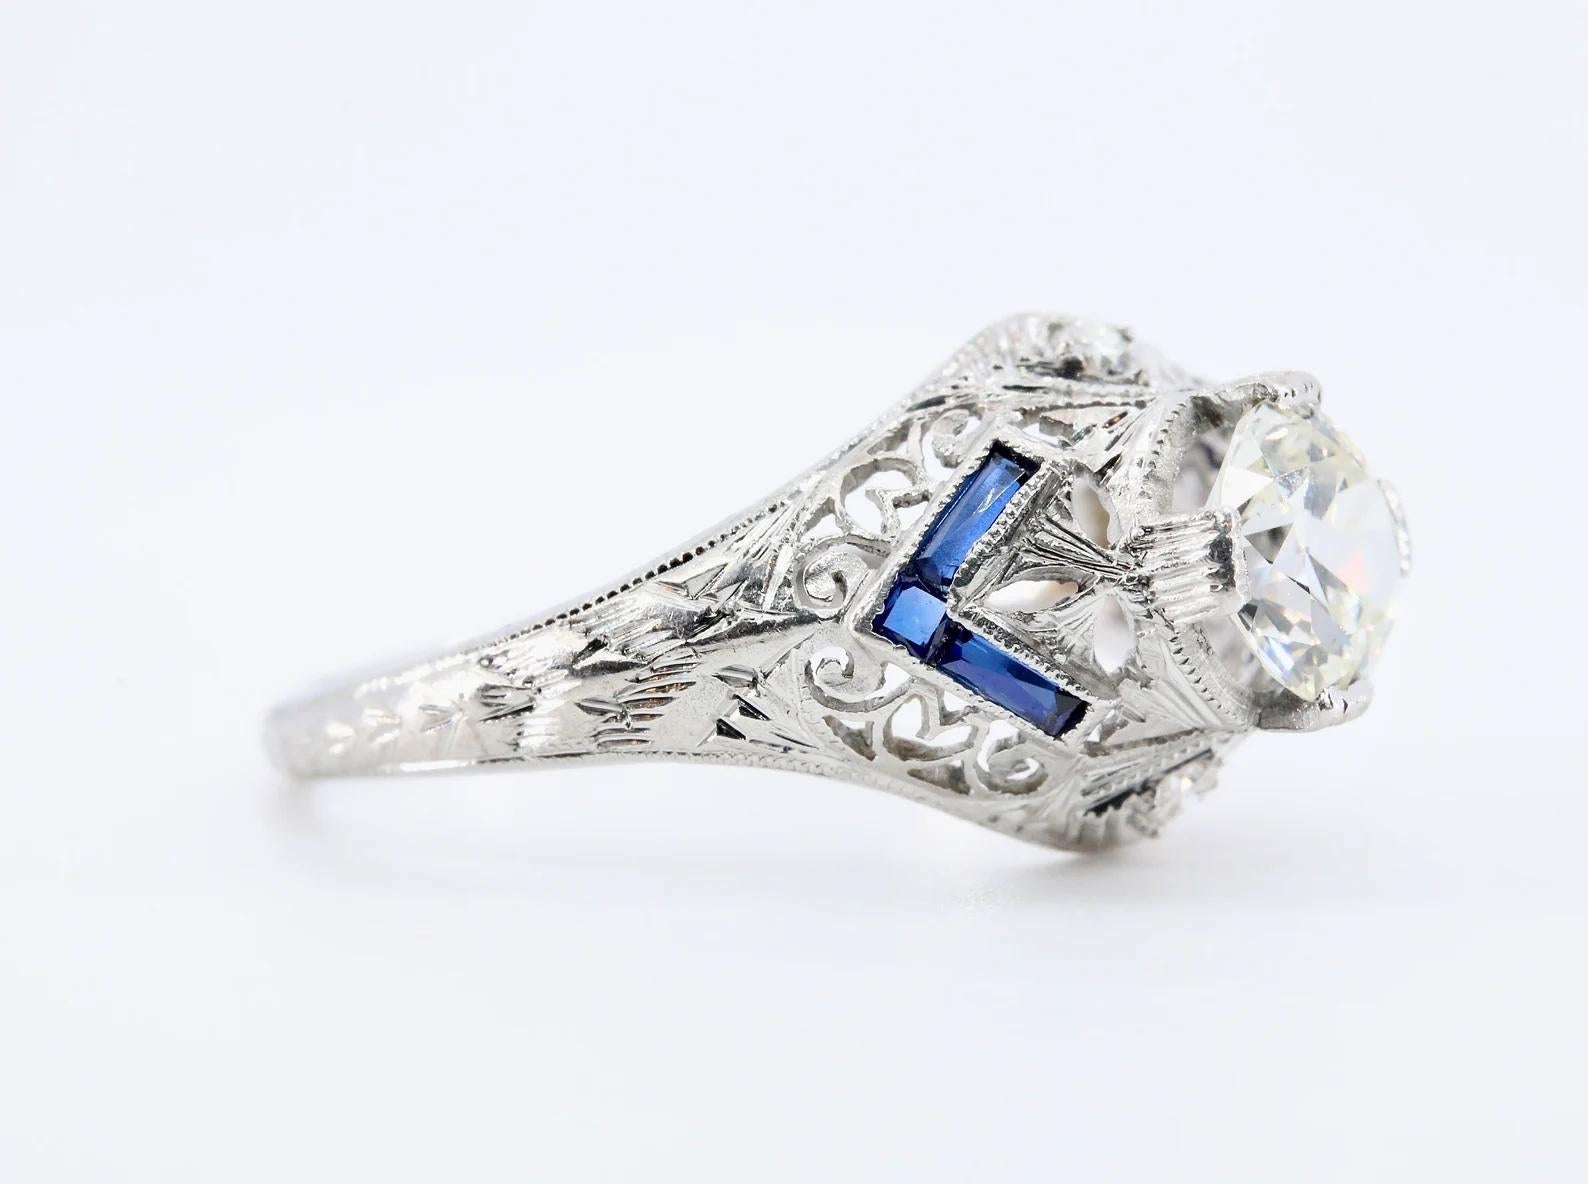 A handmade Art Deco period diamond, and sapphire engagement ring crafted in platinum. Centered by a 0.85 carat old European cut diamond of H color and VS1 clarity. 

The hand engraved mounting displays beautiful pierced filigree work throughout in a